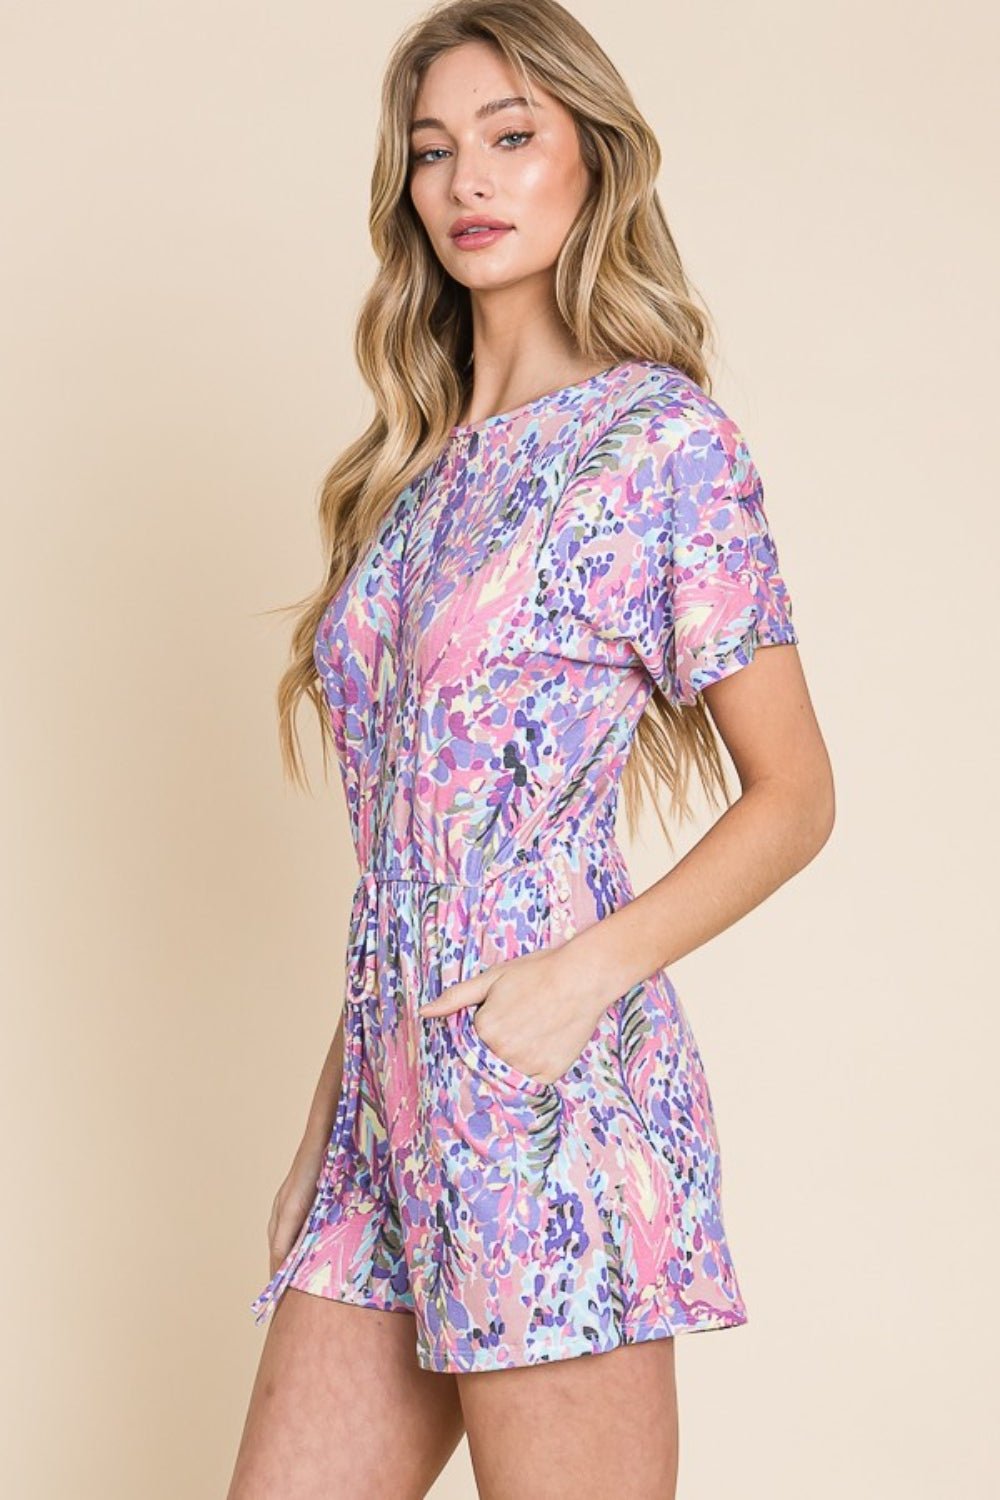 Printed Short Sleeve Romper with Pockets in PlumRomperBOMBOM